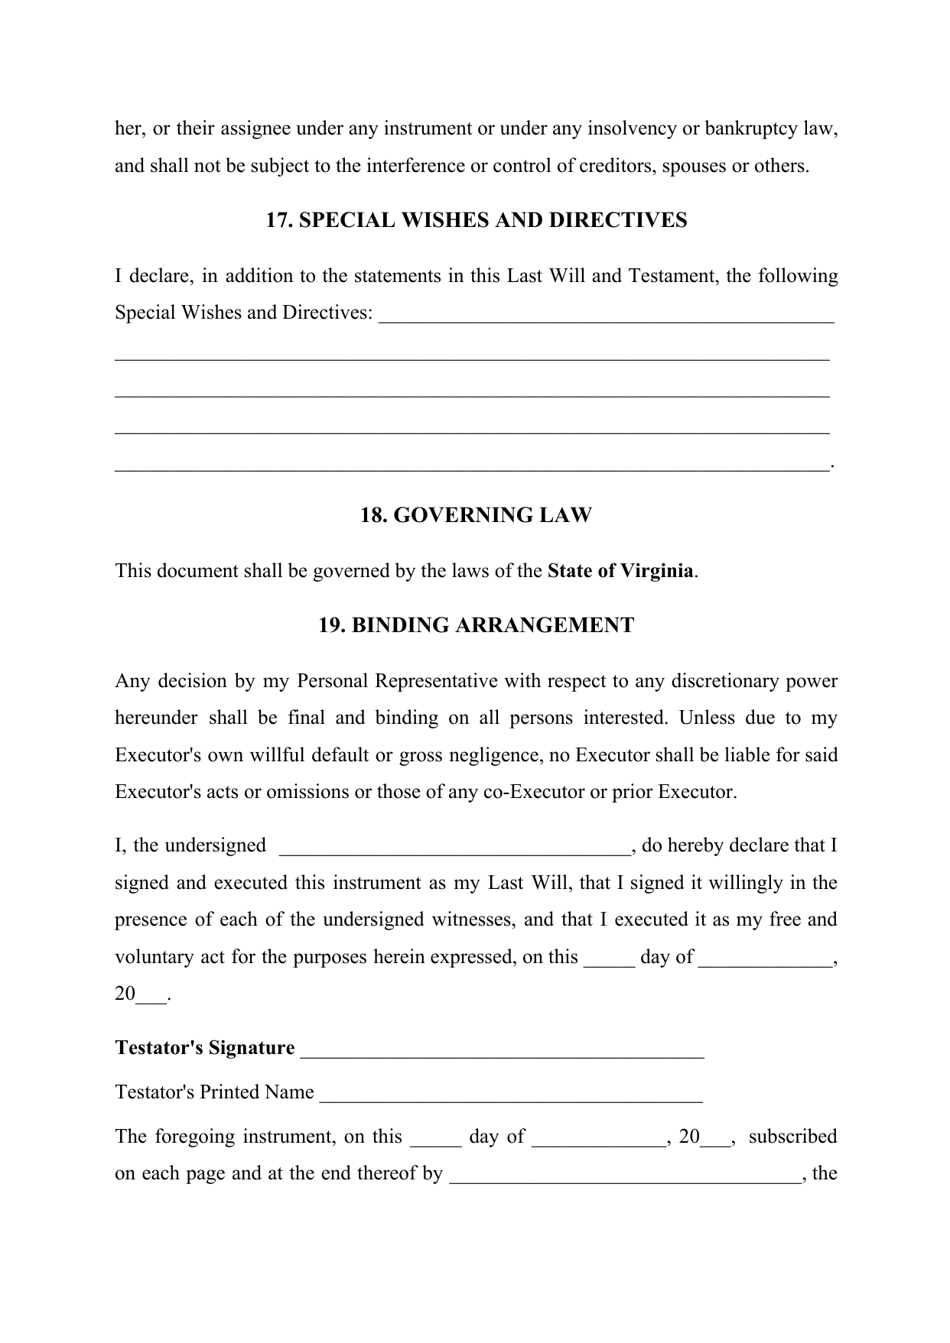 Virginia Last Will and Testament Template Download Printable PDF